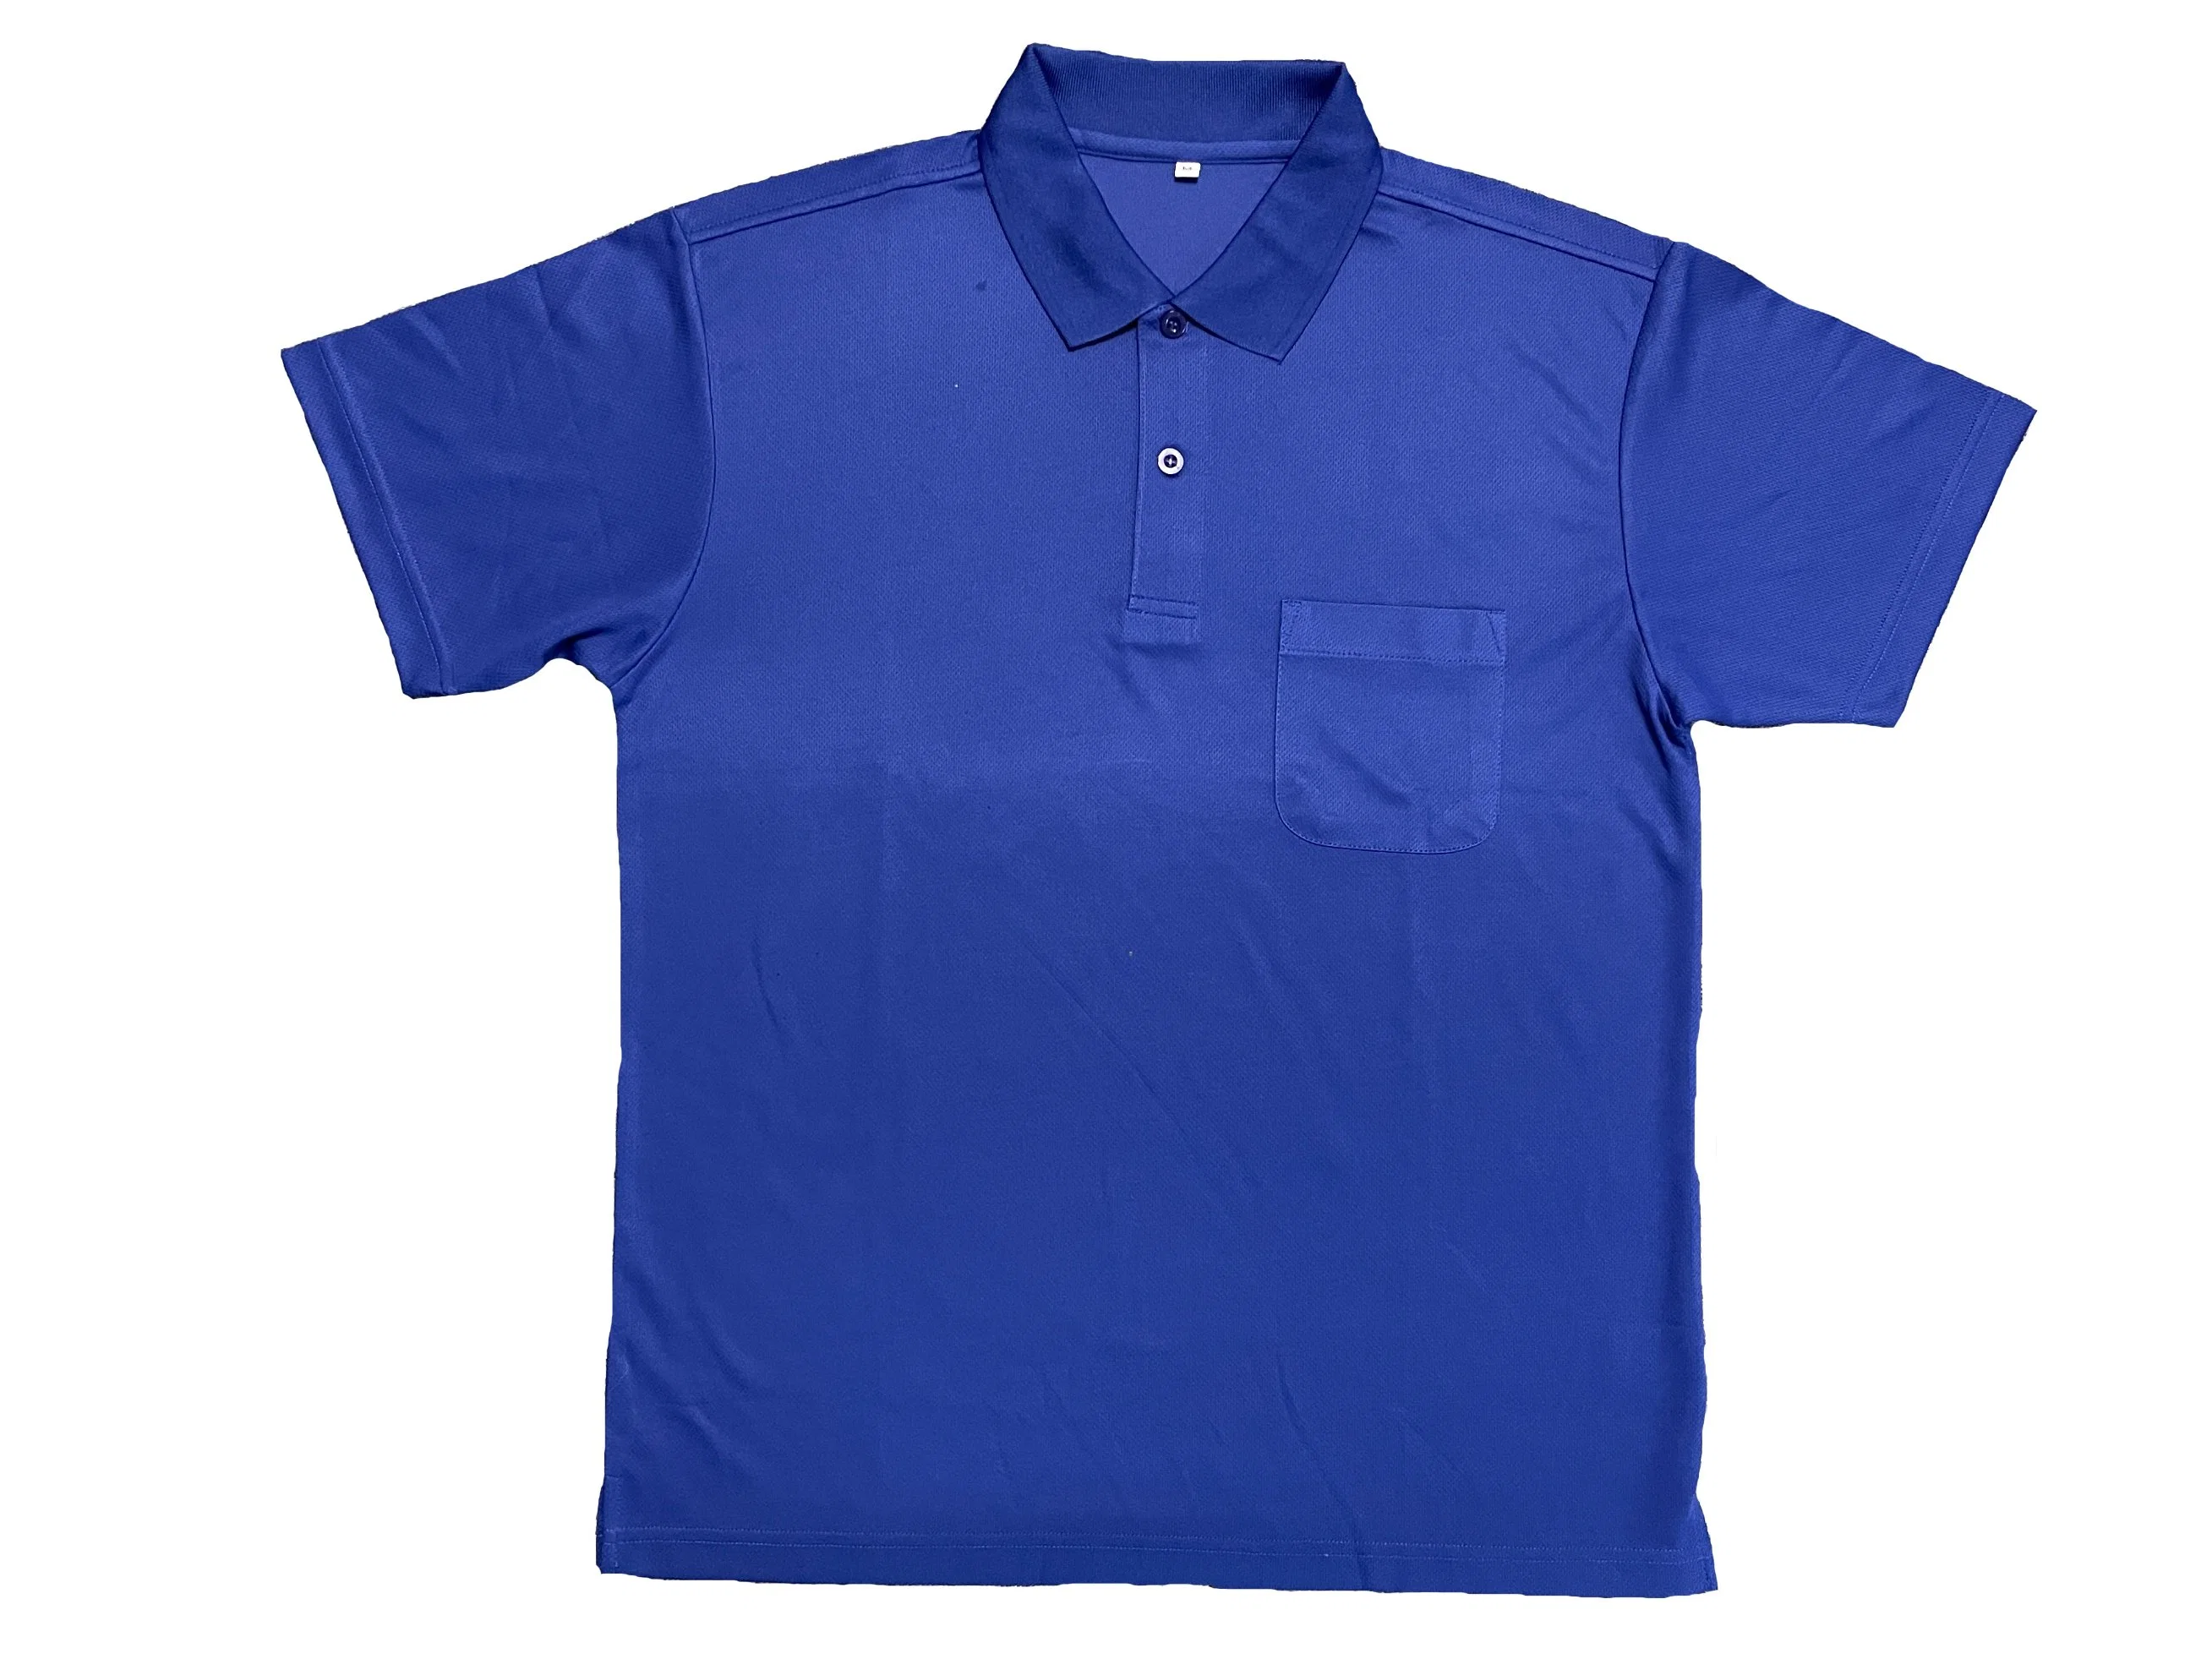 Blue Men's Dry Fit Sports Wear Shirt for Knitted Clothes